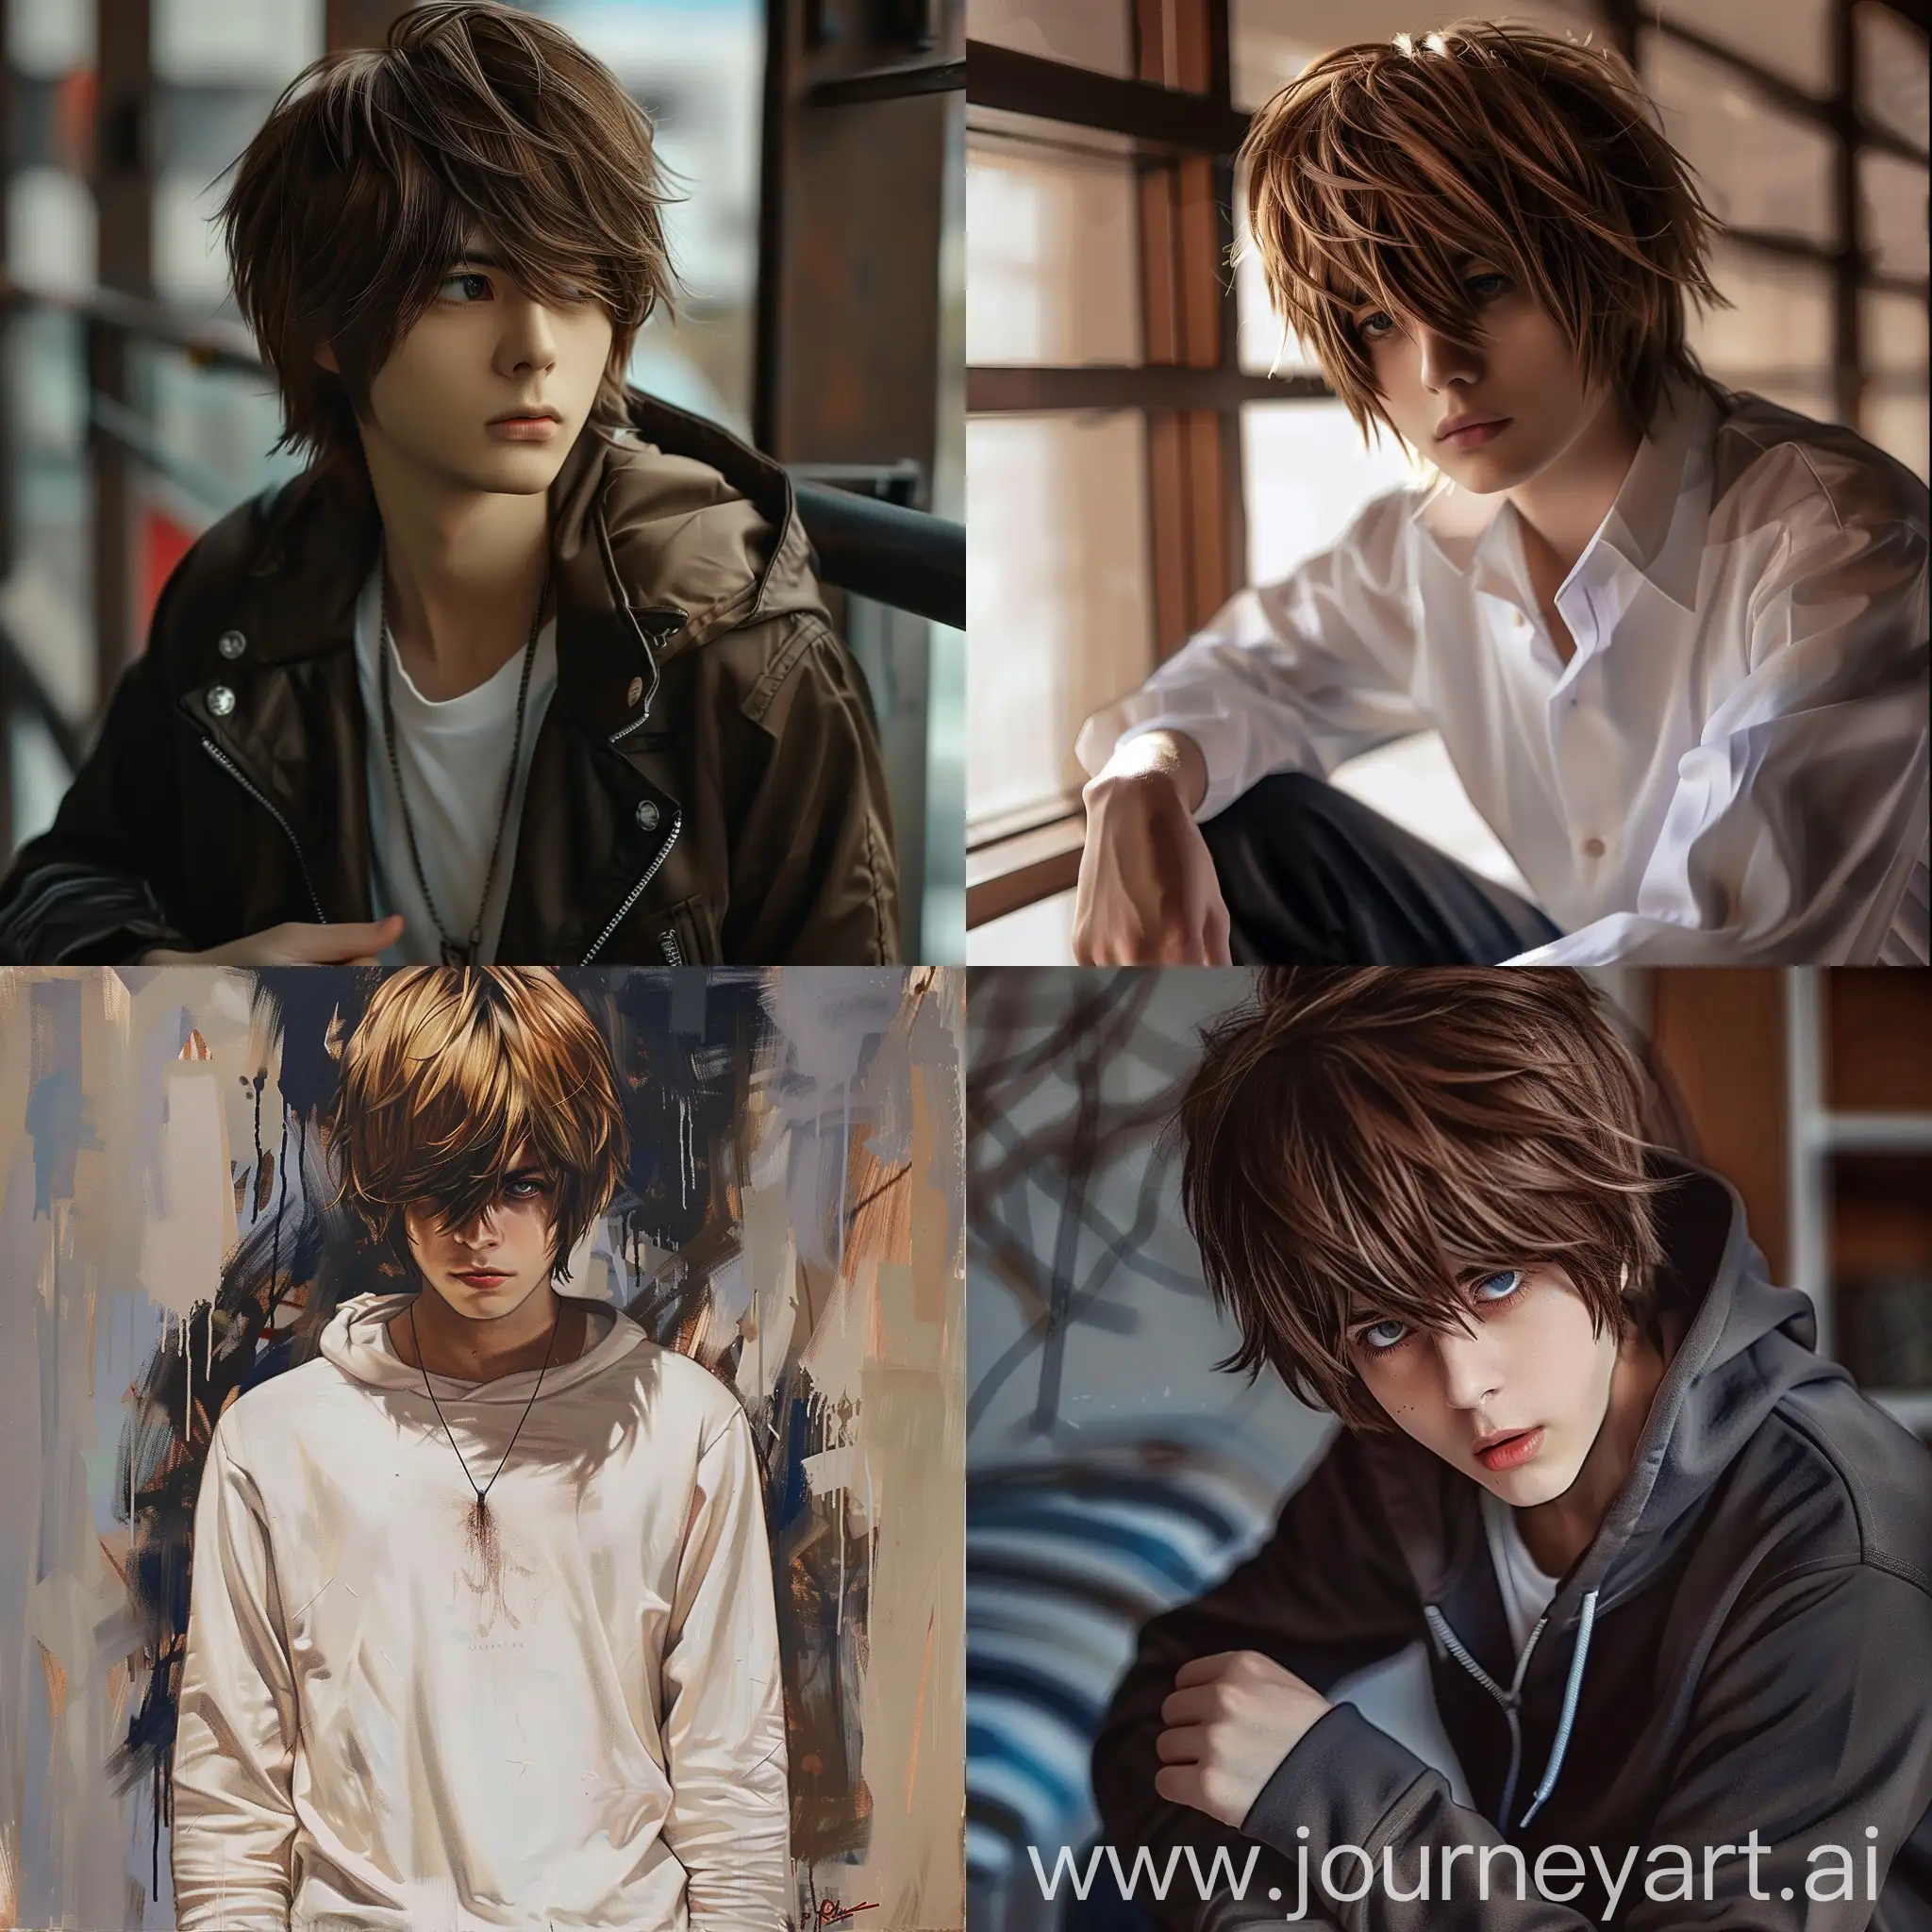 Realistic-FullLength-Portrait-of-Light-Yagami-from-Death-Note-Anime